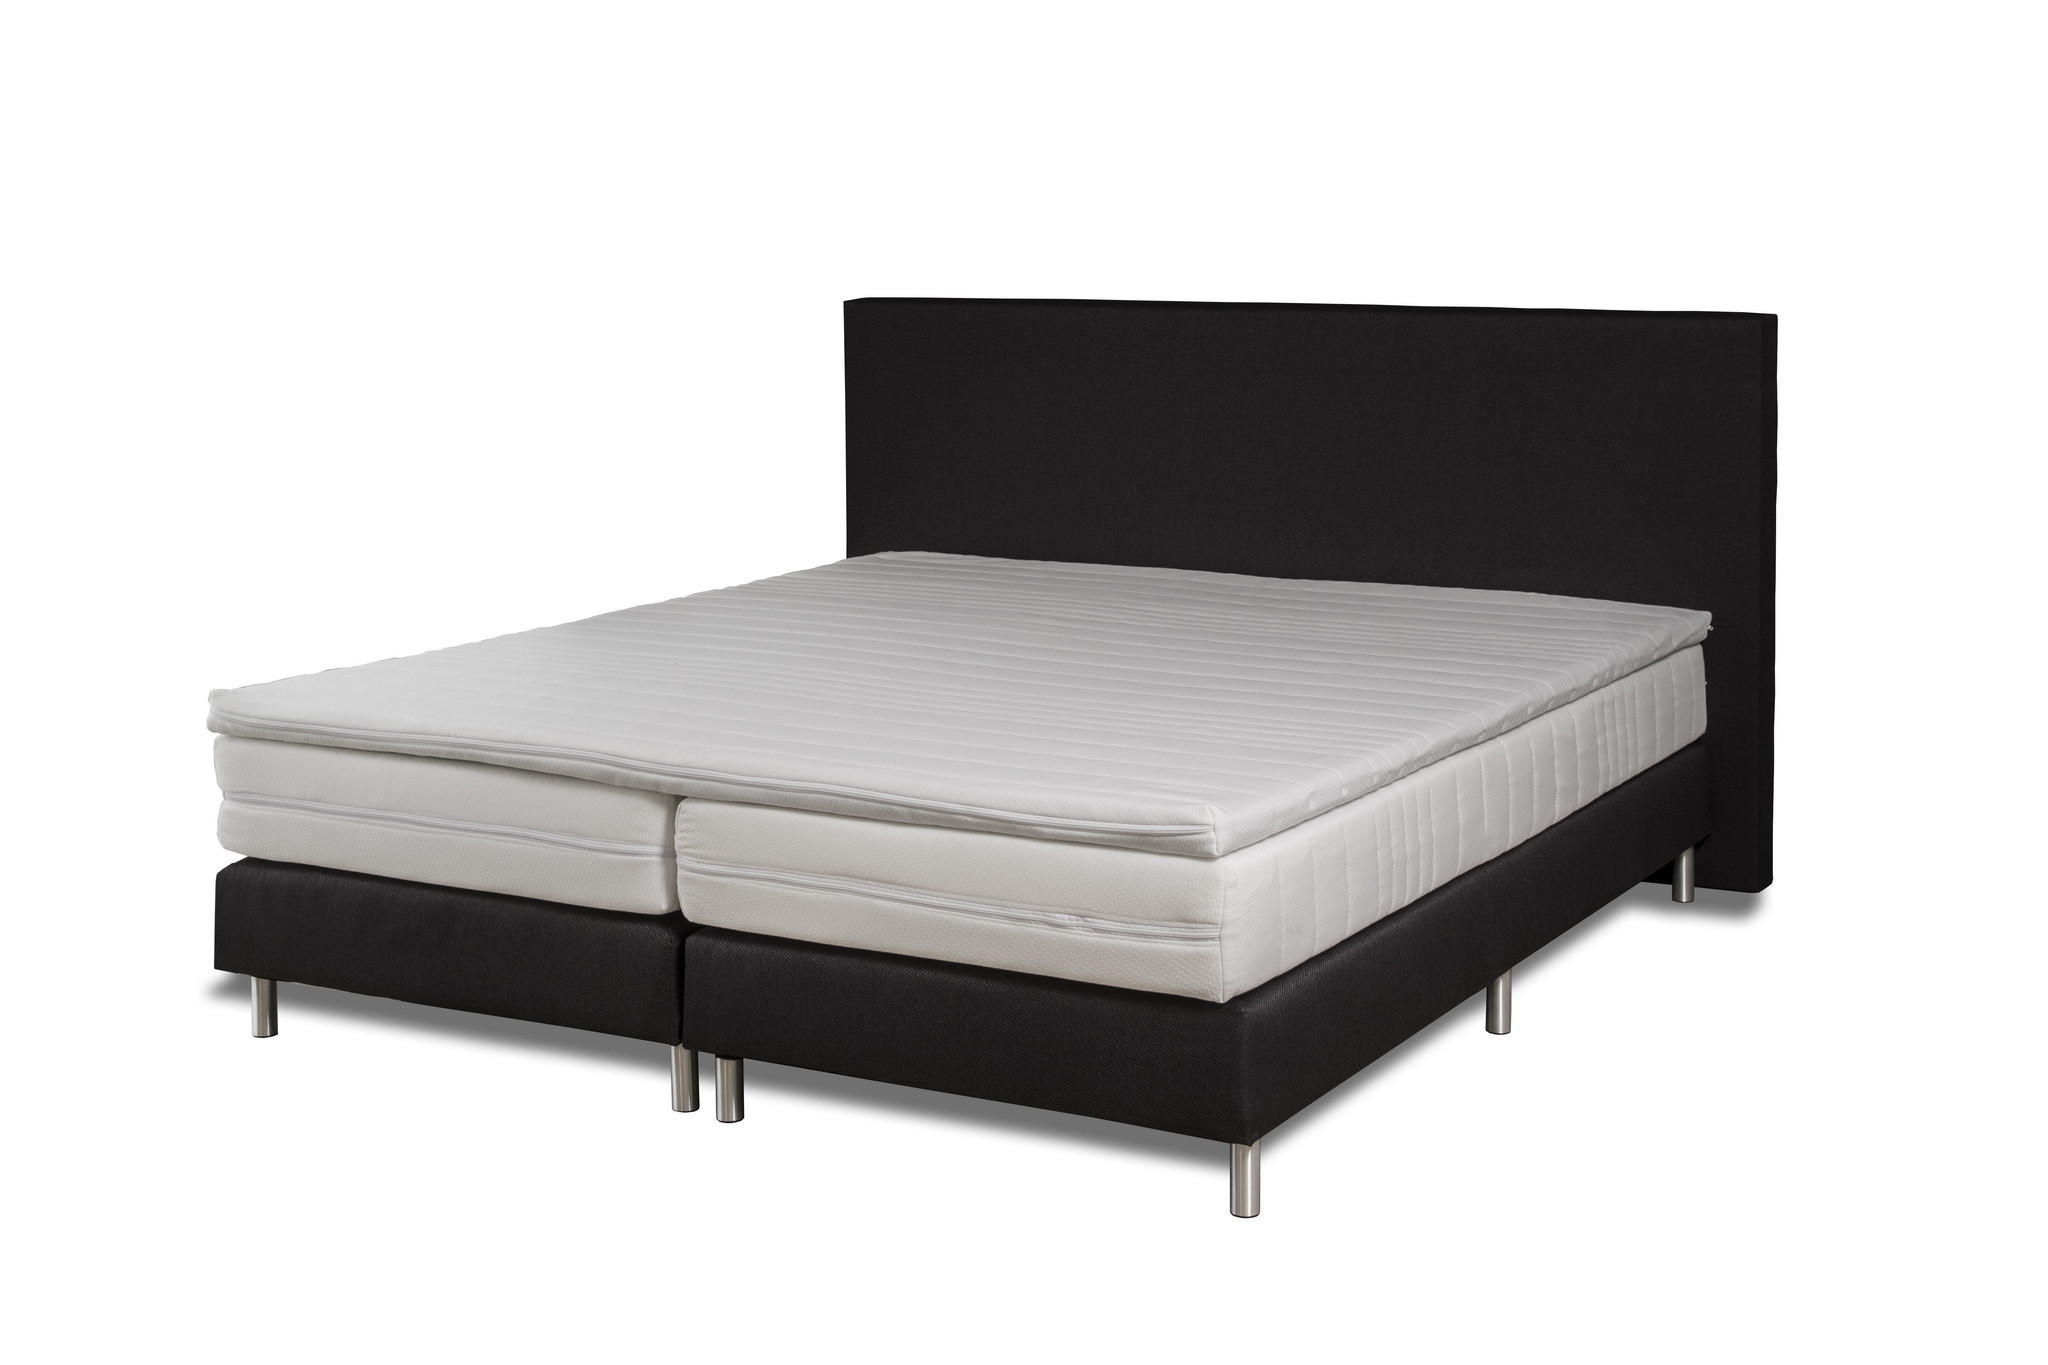 Rent a Boxspring bed 2 persons 140x200? Rent at KeyPro furniture rental!